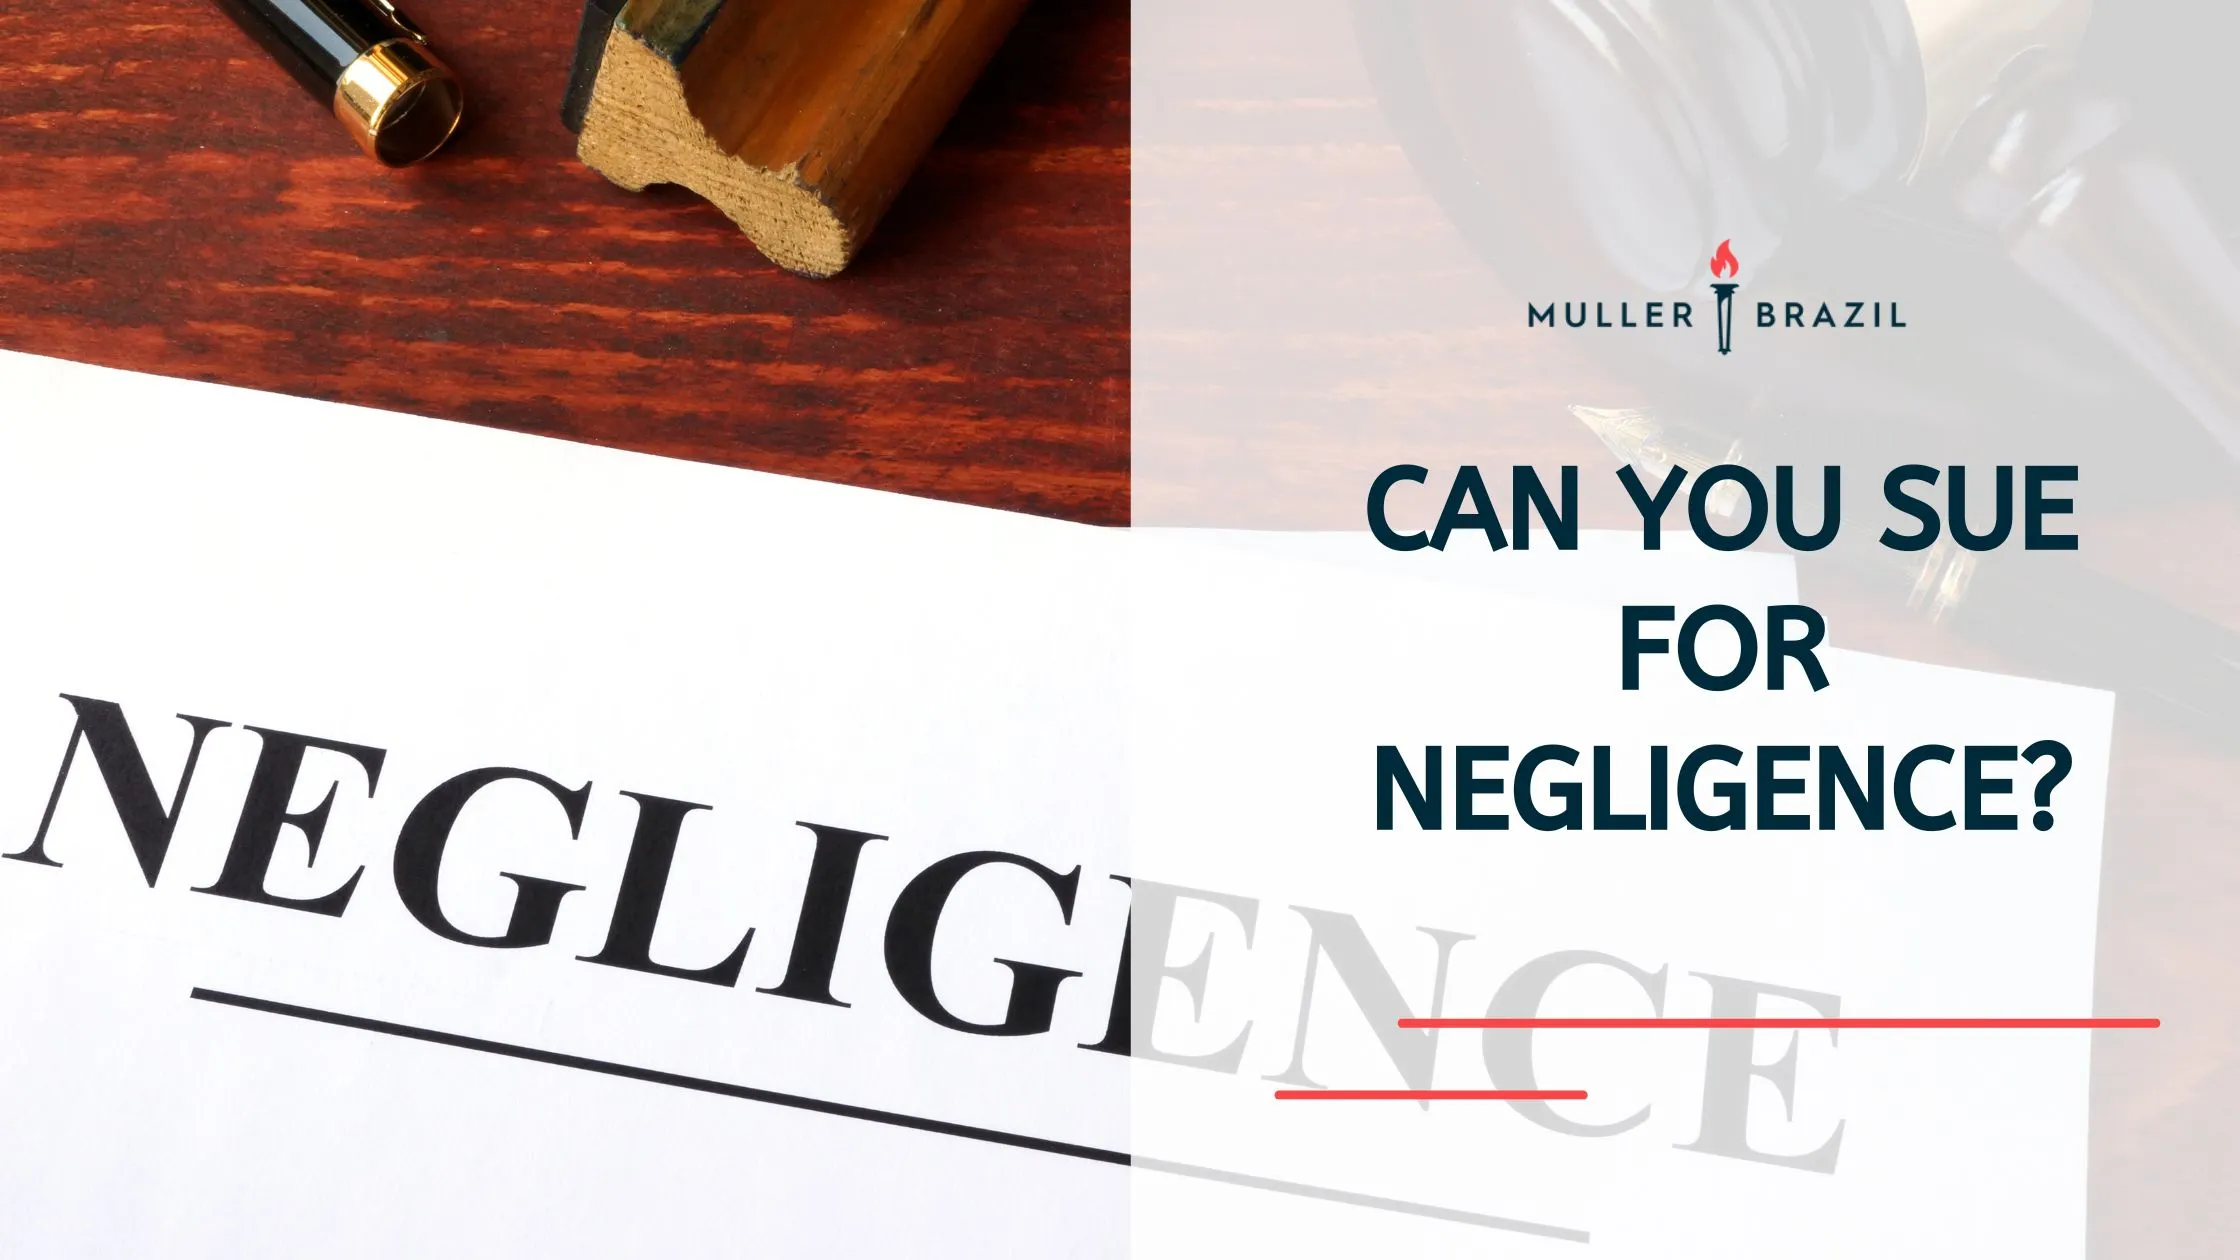 Image of a legal document headlined 'NEGLIGENCE' with a pen and gavel, alongside bold text 'CAN YOU SUE FOR NEGLIGENCE?' by Muller Brazil, conveying legal recourse in negligence cases.